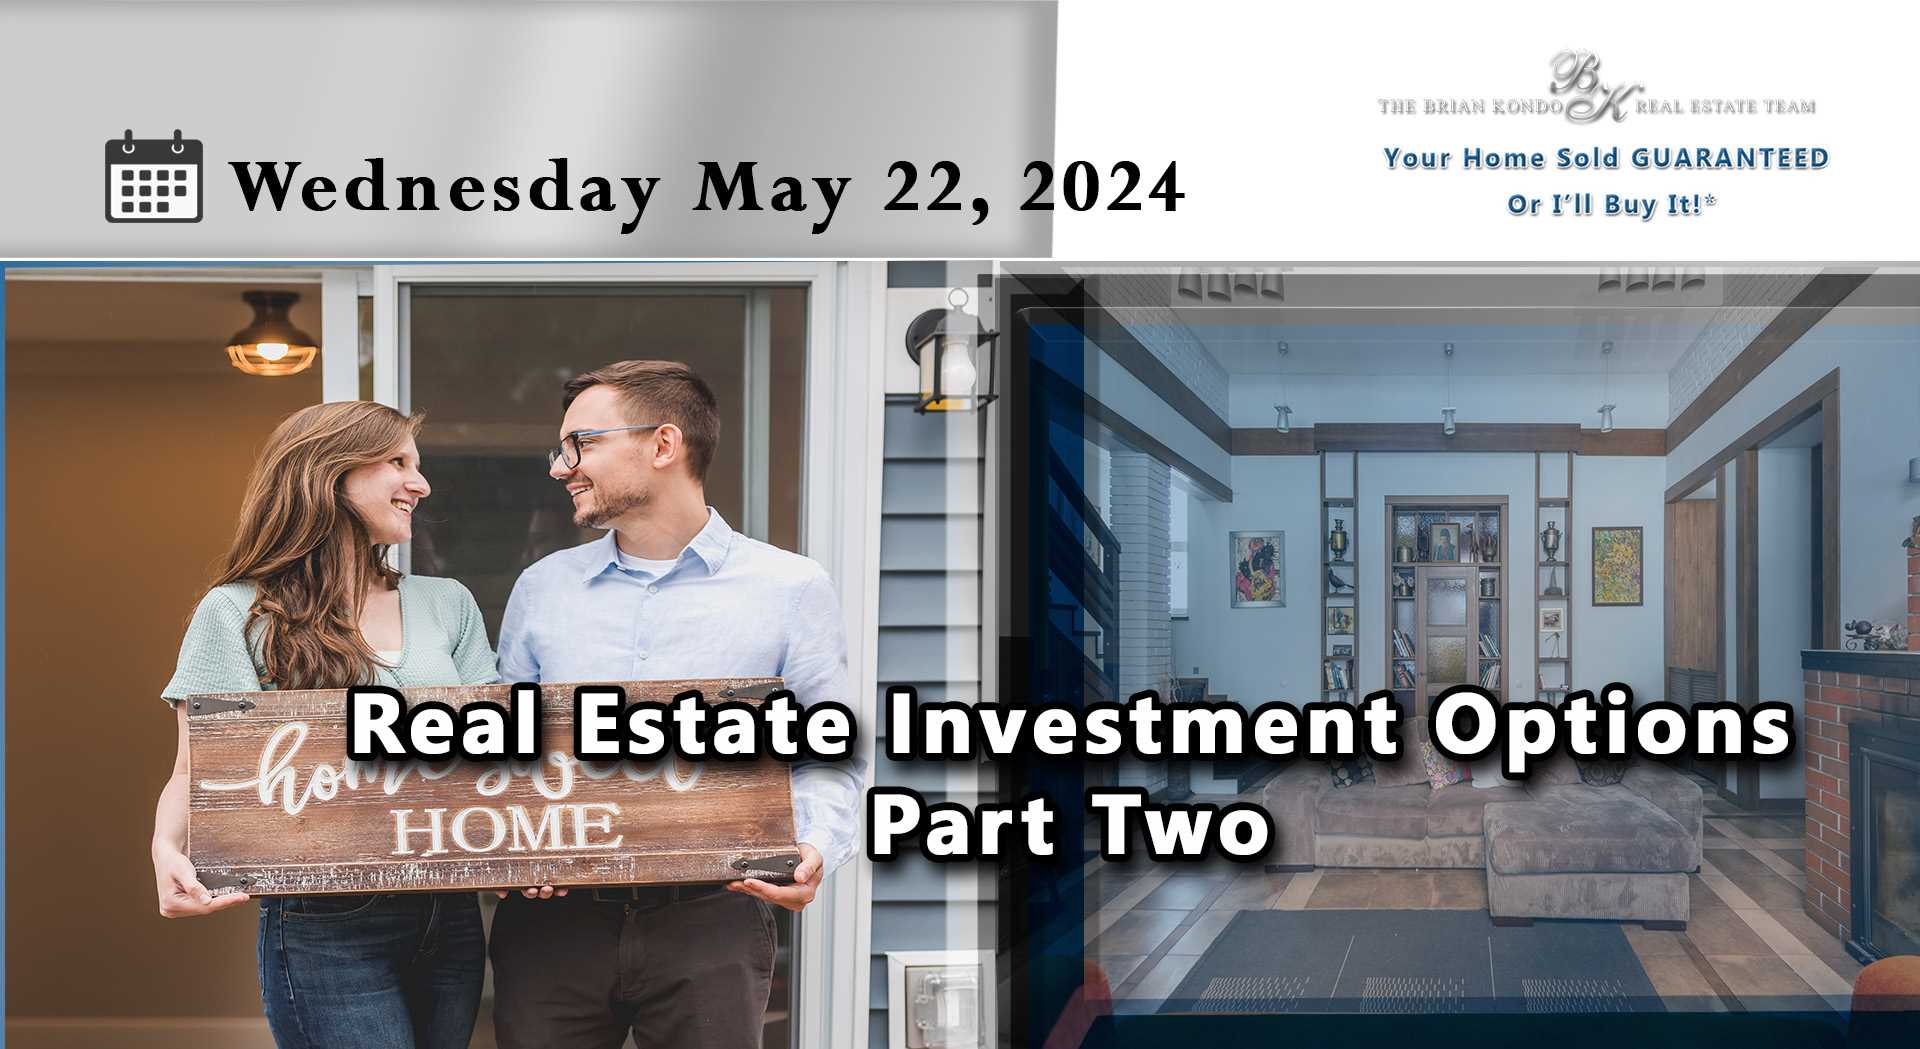 Real Estate Investment Options Part Two